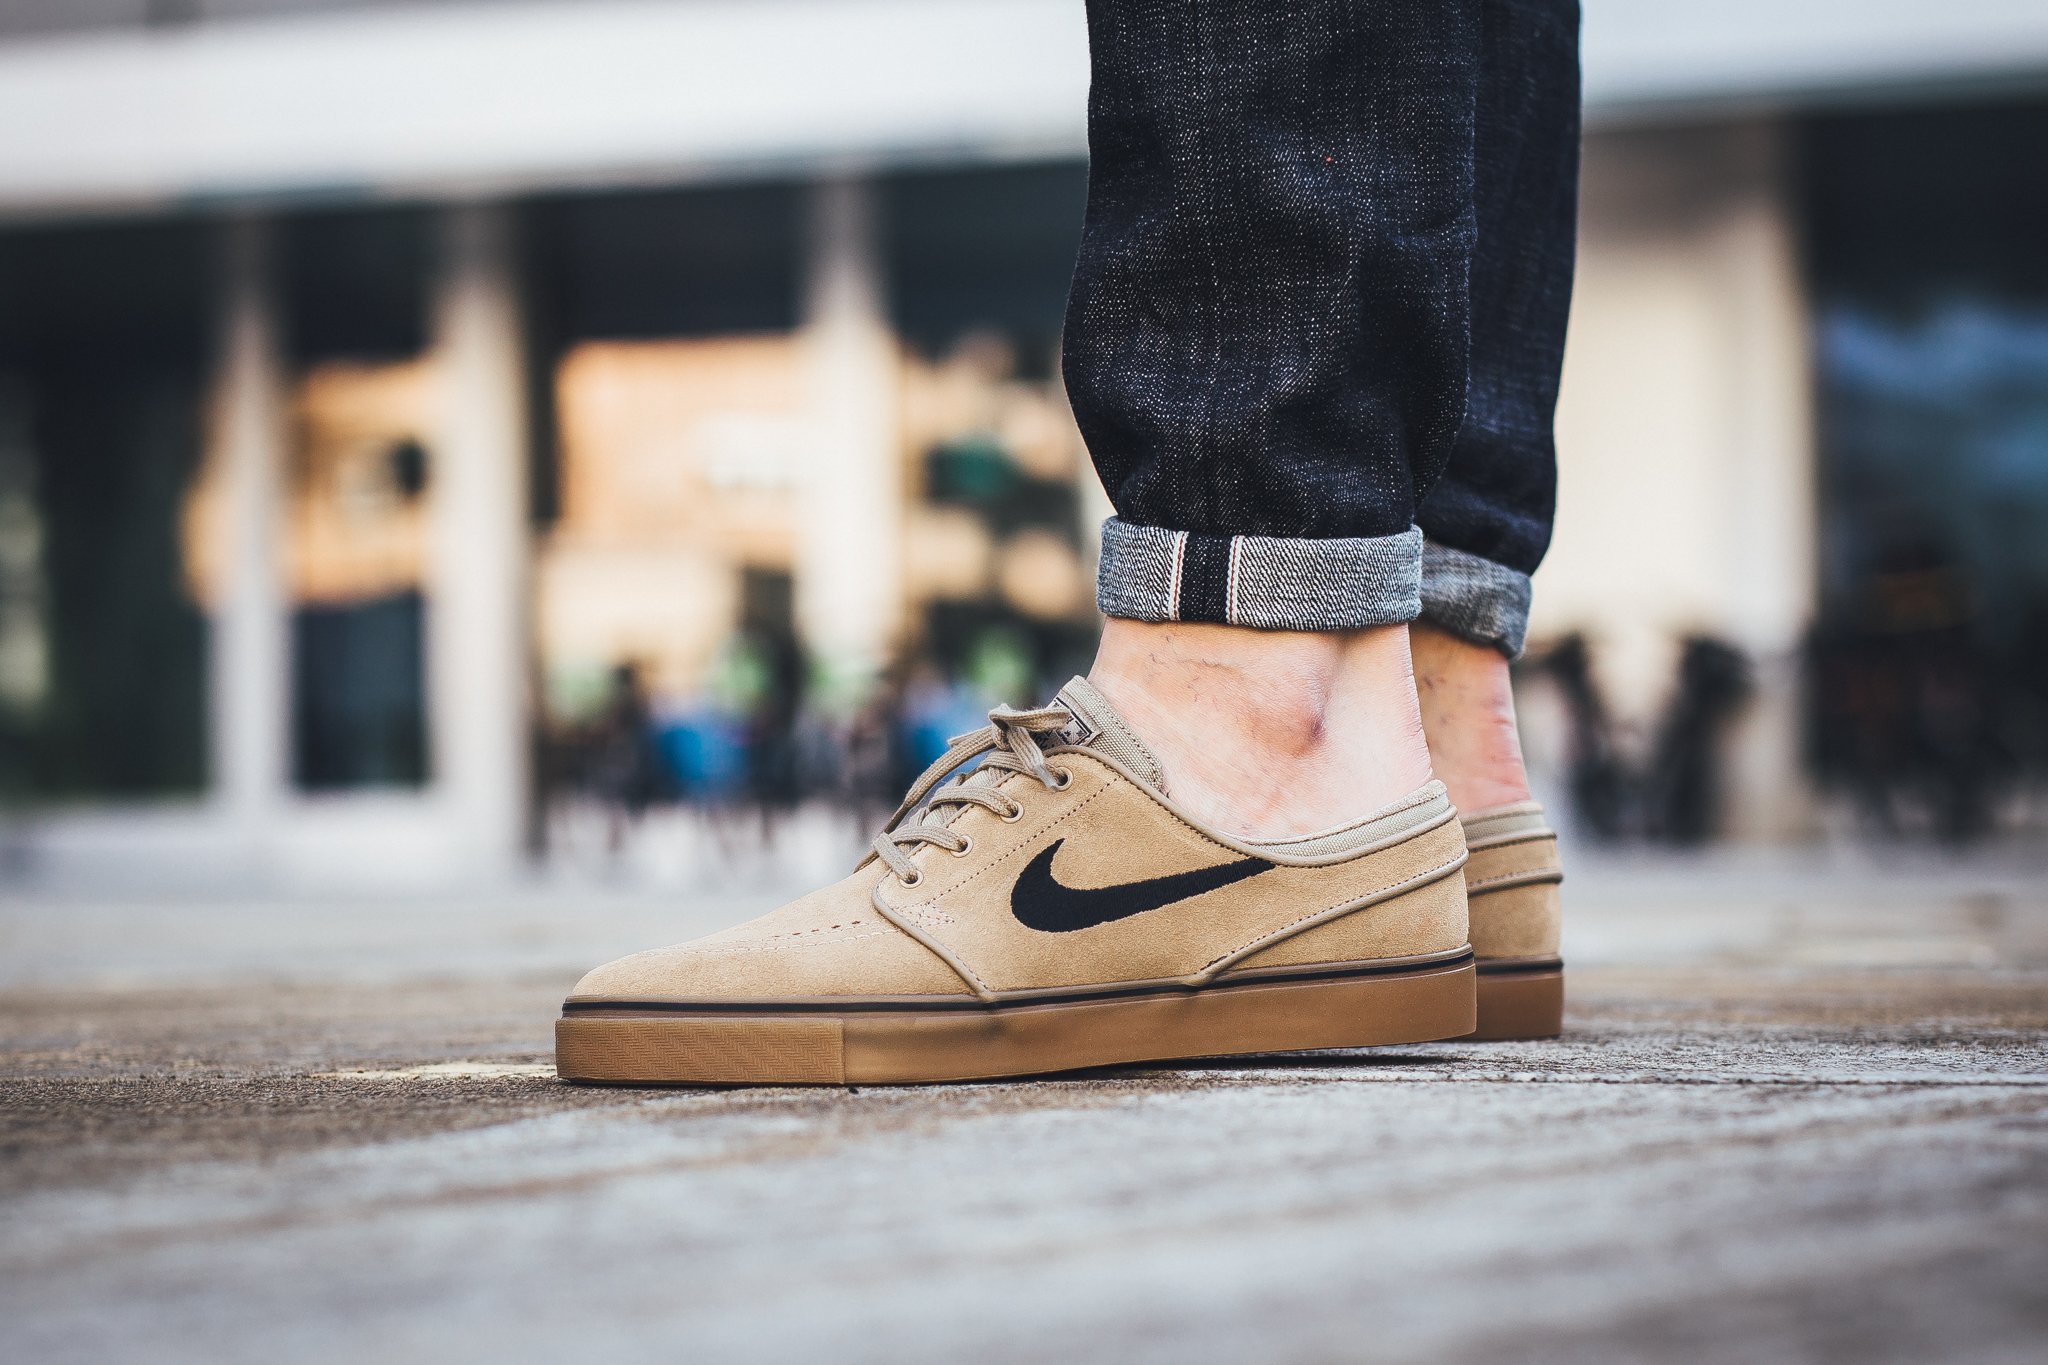 Titolo on Twitter: "Nike SB Zoom Stefan Janoski Khaki/Black-Gum Light Brown Available now at Titolo SHOP HERE https://t.co/jYmBFY4Nmh" /